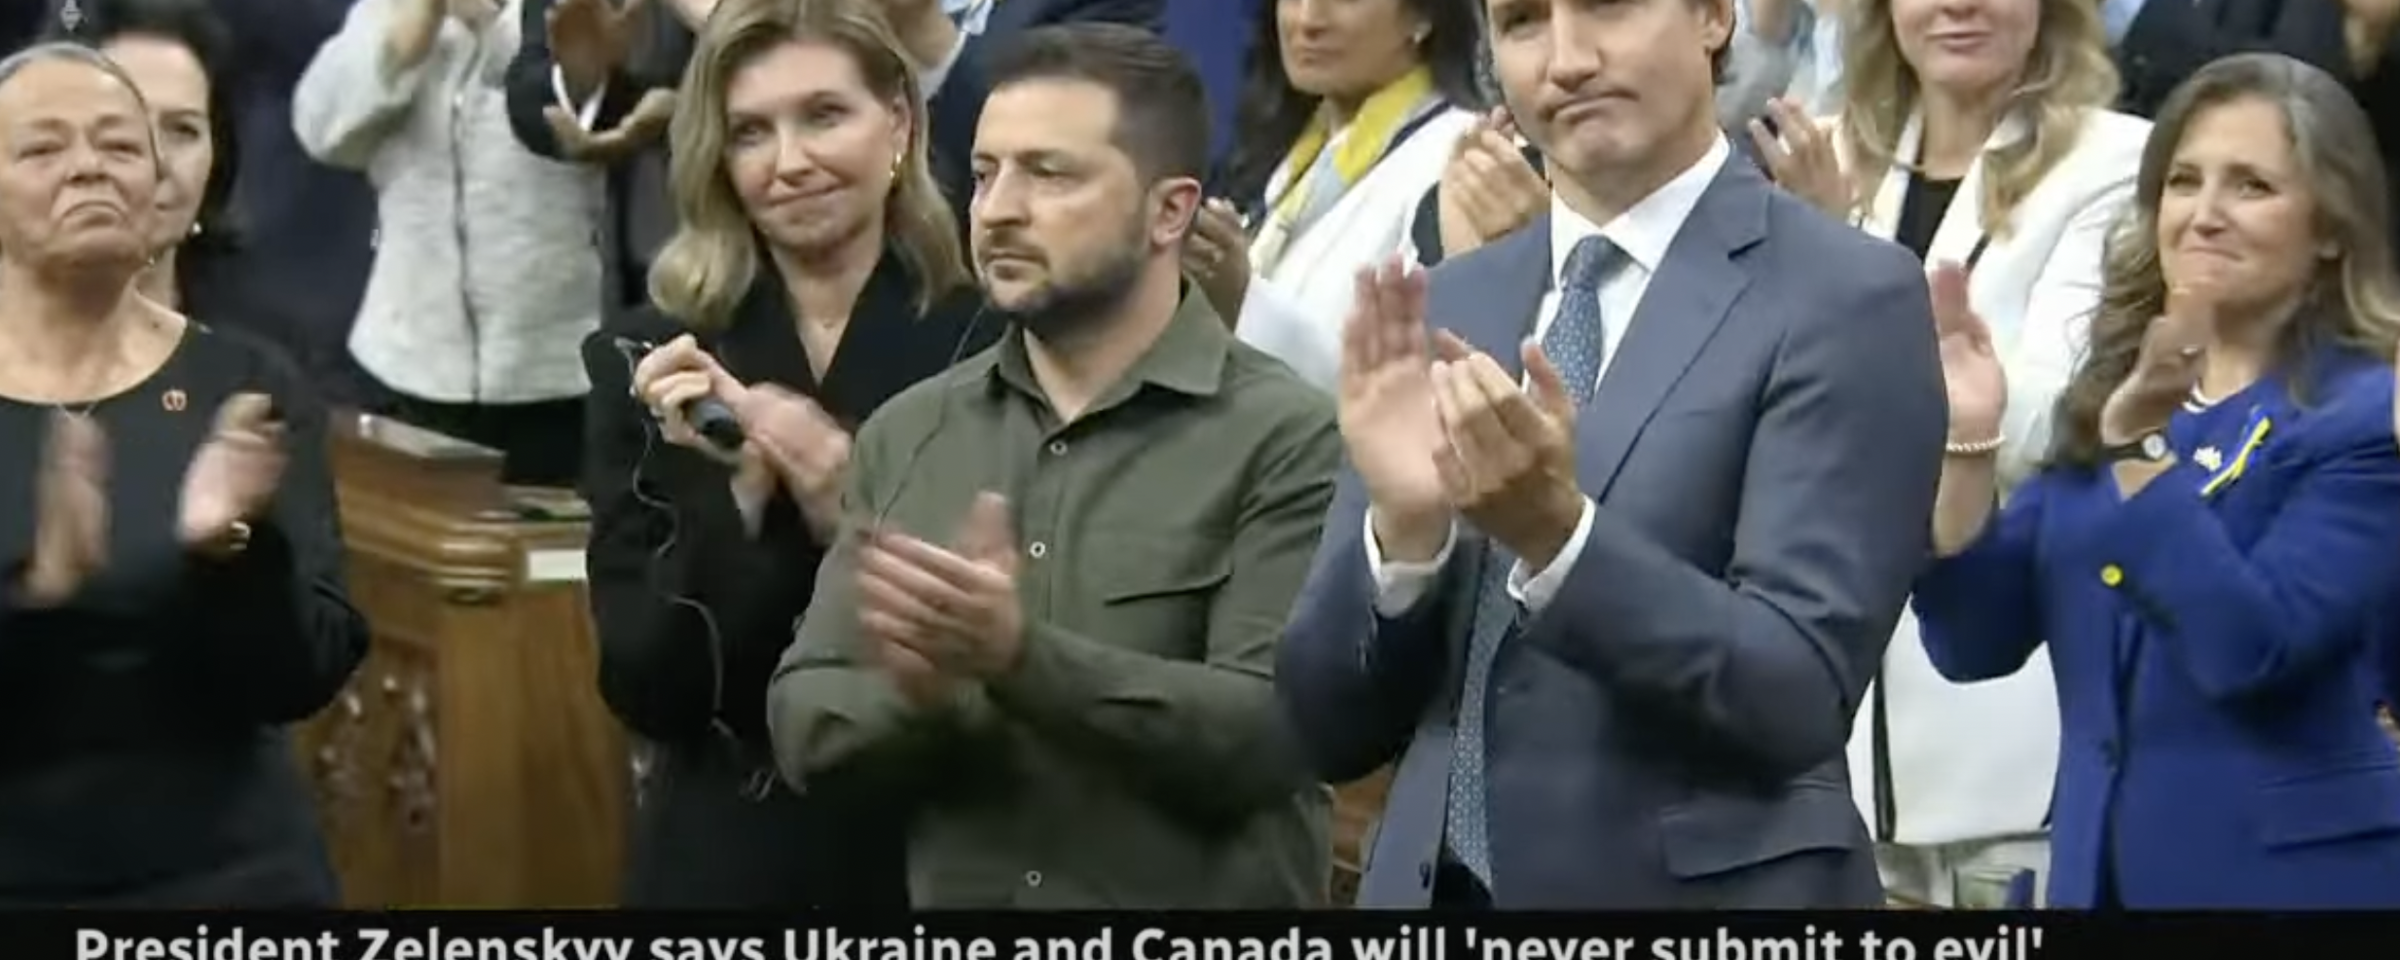 Zelensky in a military shirt stands next to Trudeau who is wearing a suit and clapping as others look on